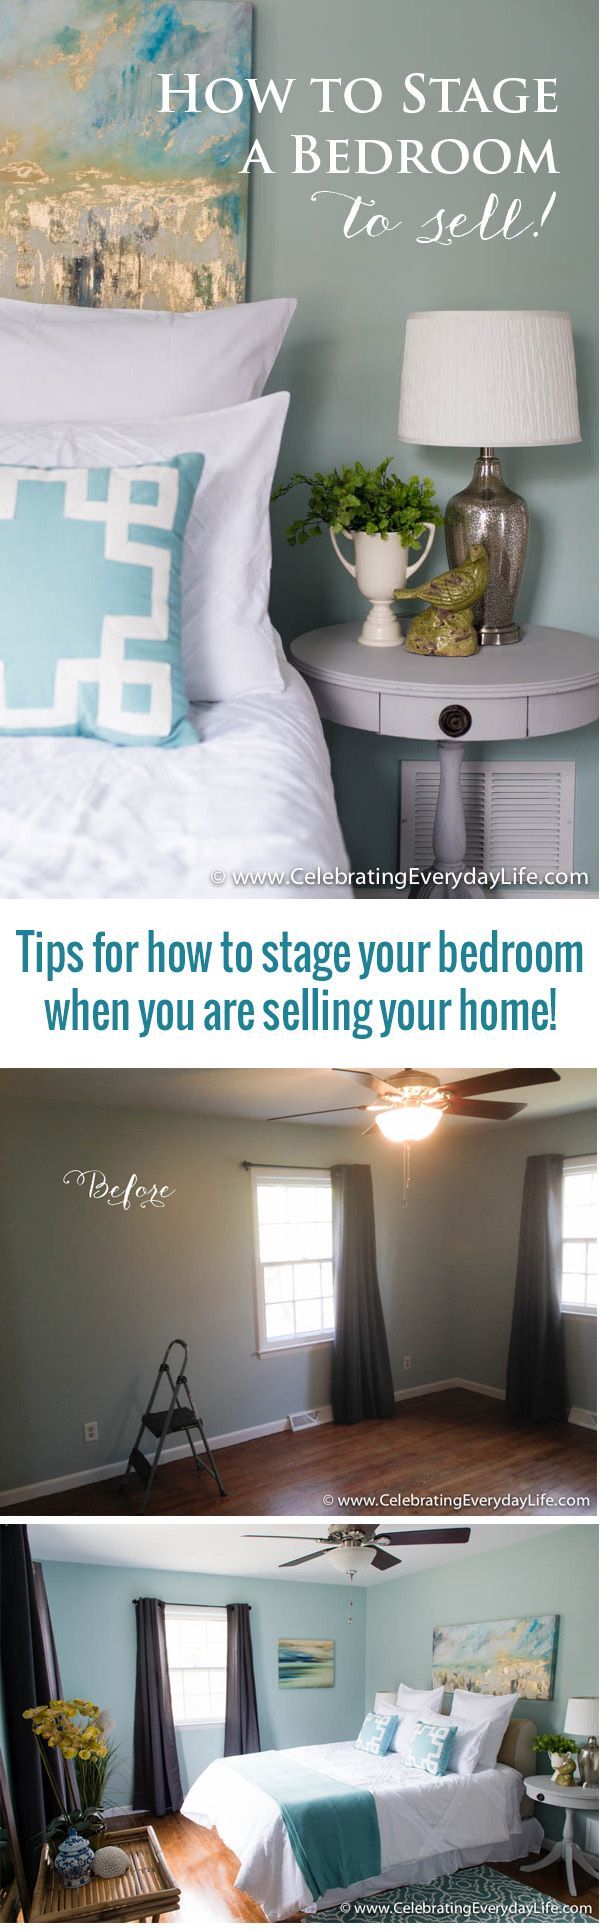 Tips for How to Stage your Bedroom to sell! Great ideas for refreshing your bedroom even if you aren’t selling.